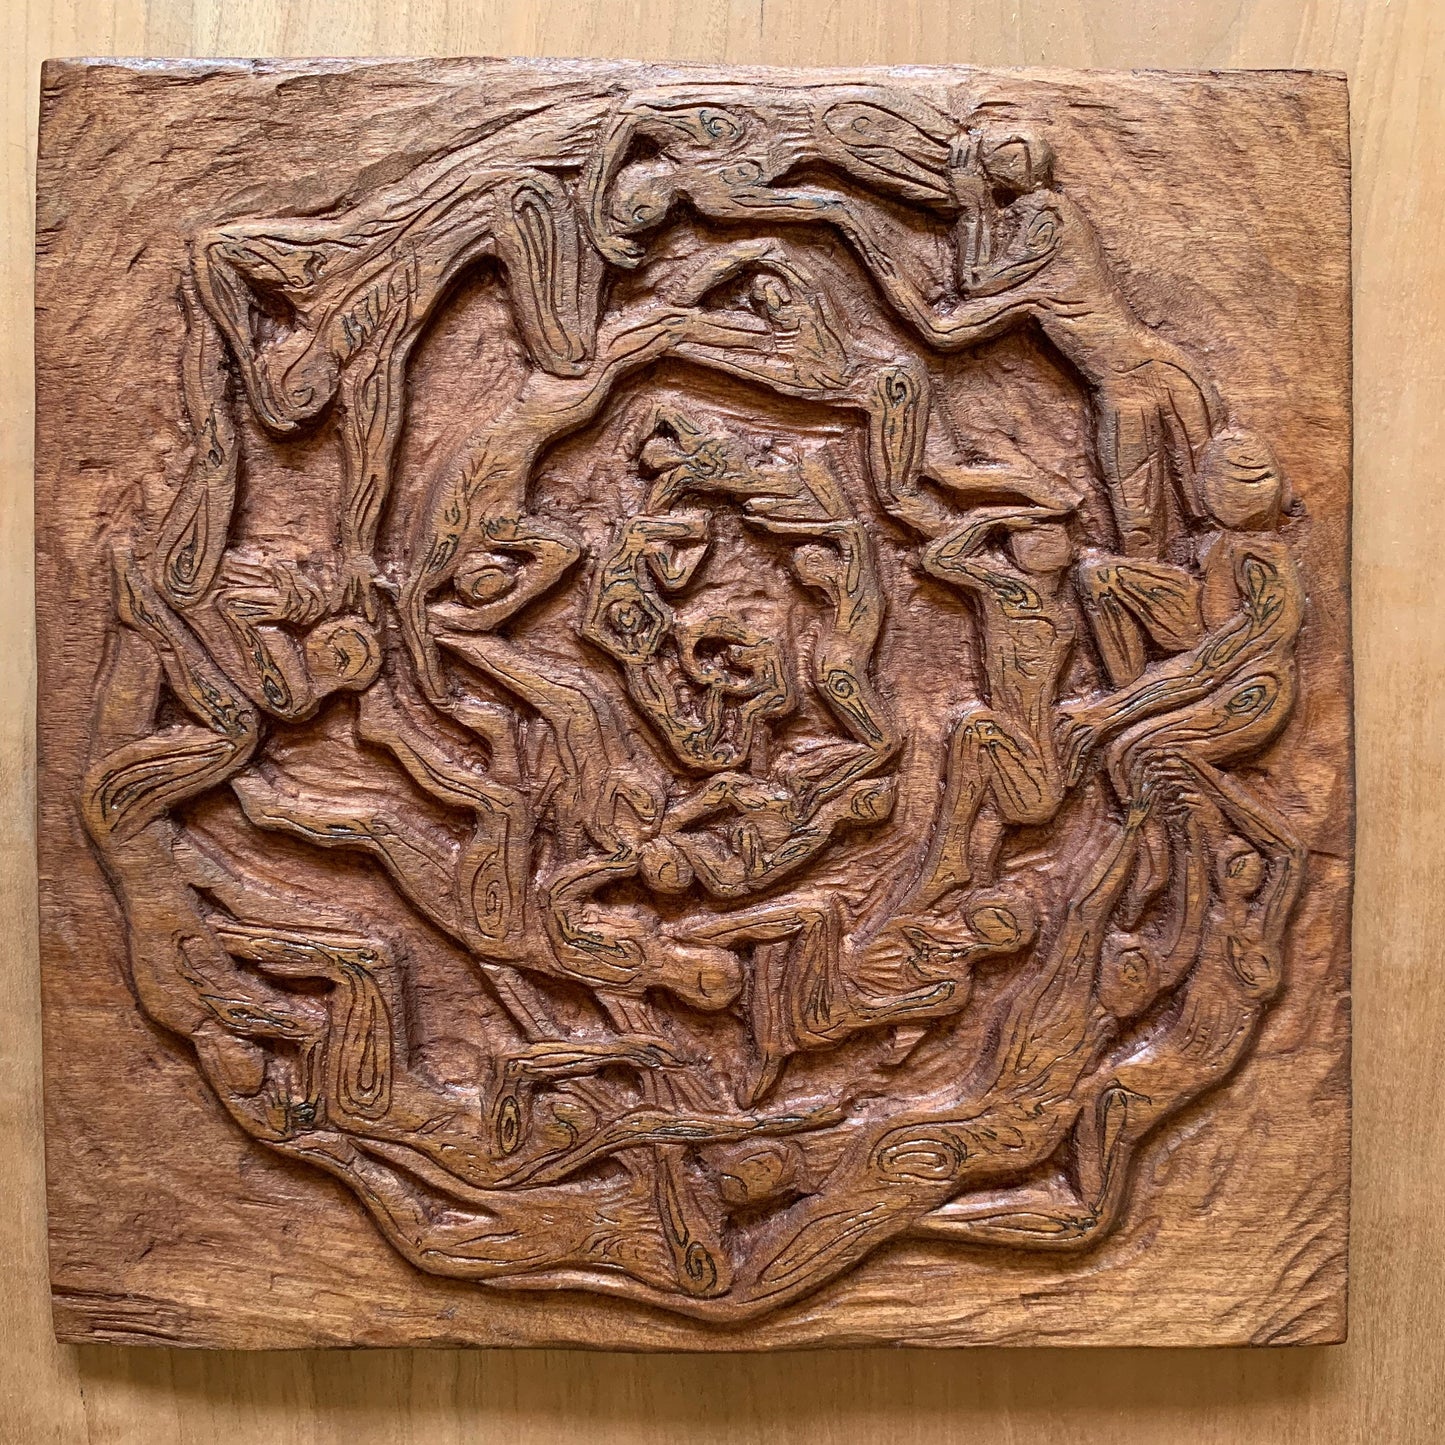 CUSTOM Made To Order: Hand-carved Original Relief Wood Blocks, choose an image, mine or yours, please read description and CONTACT SELLER